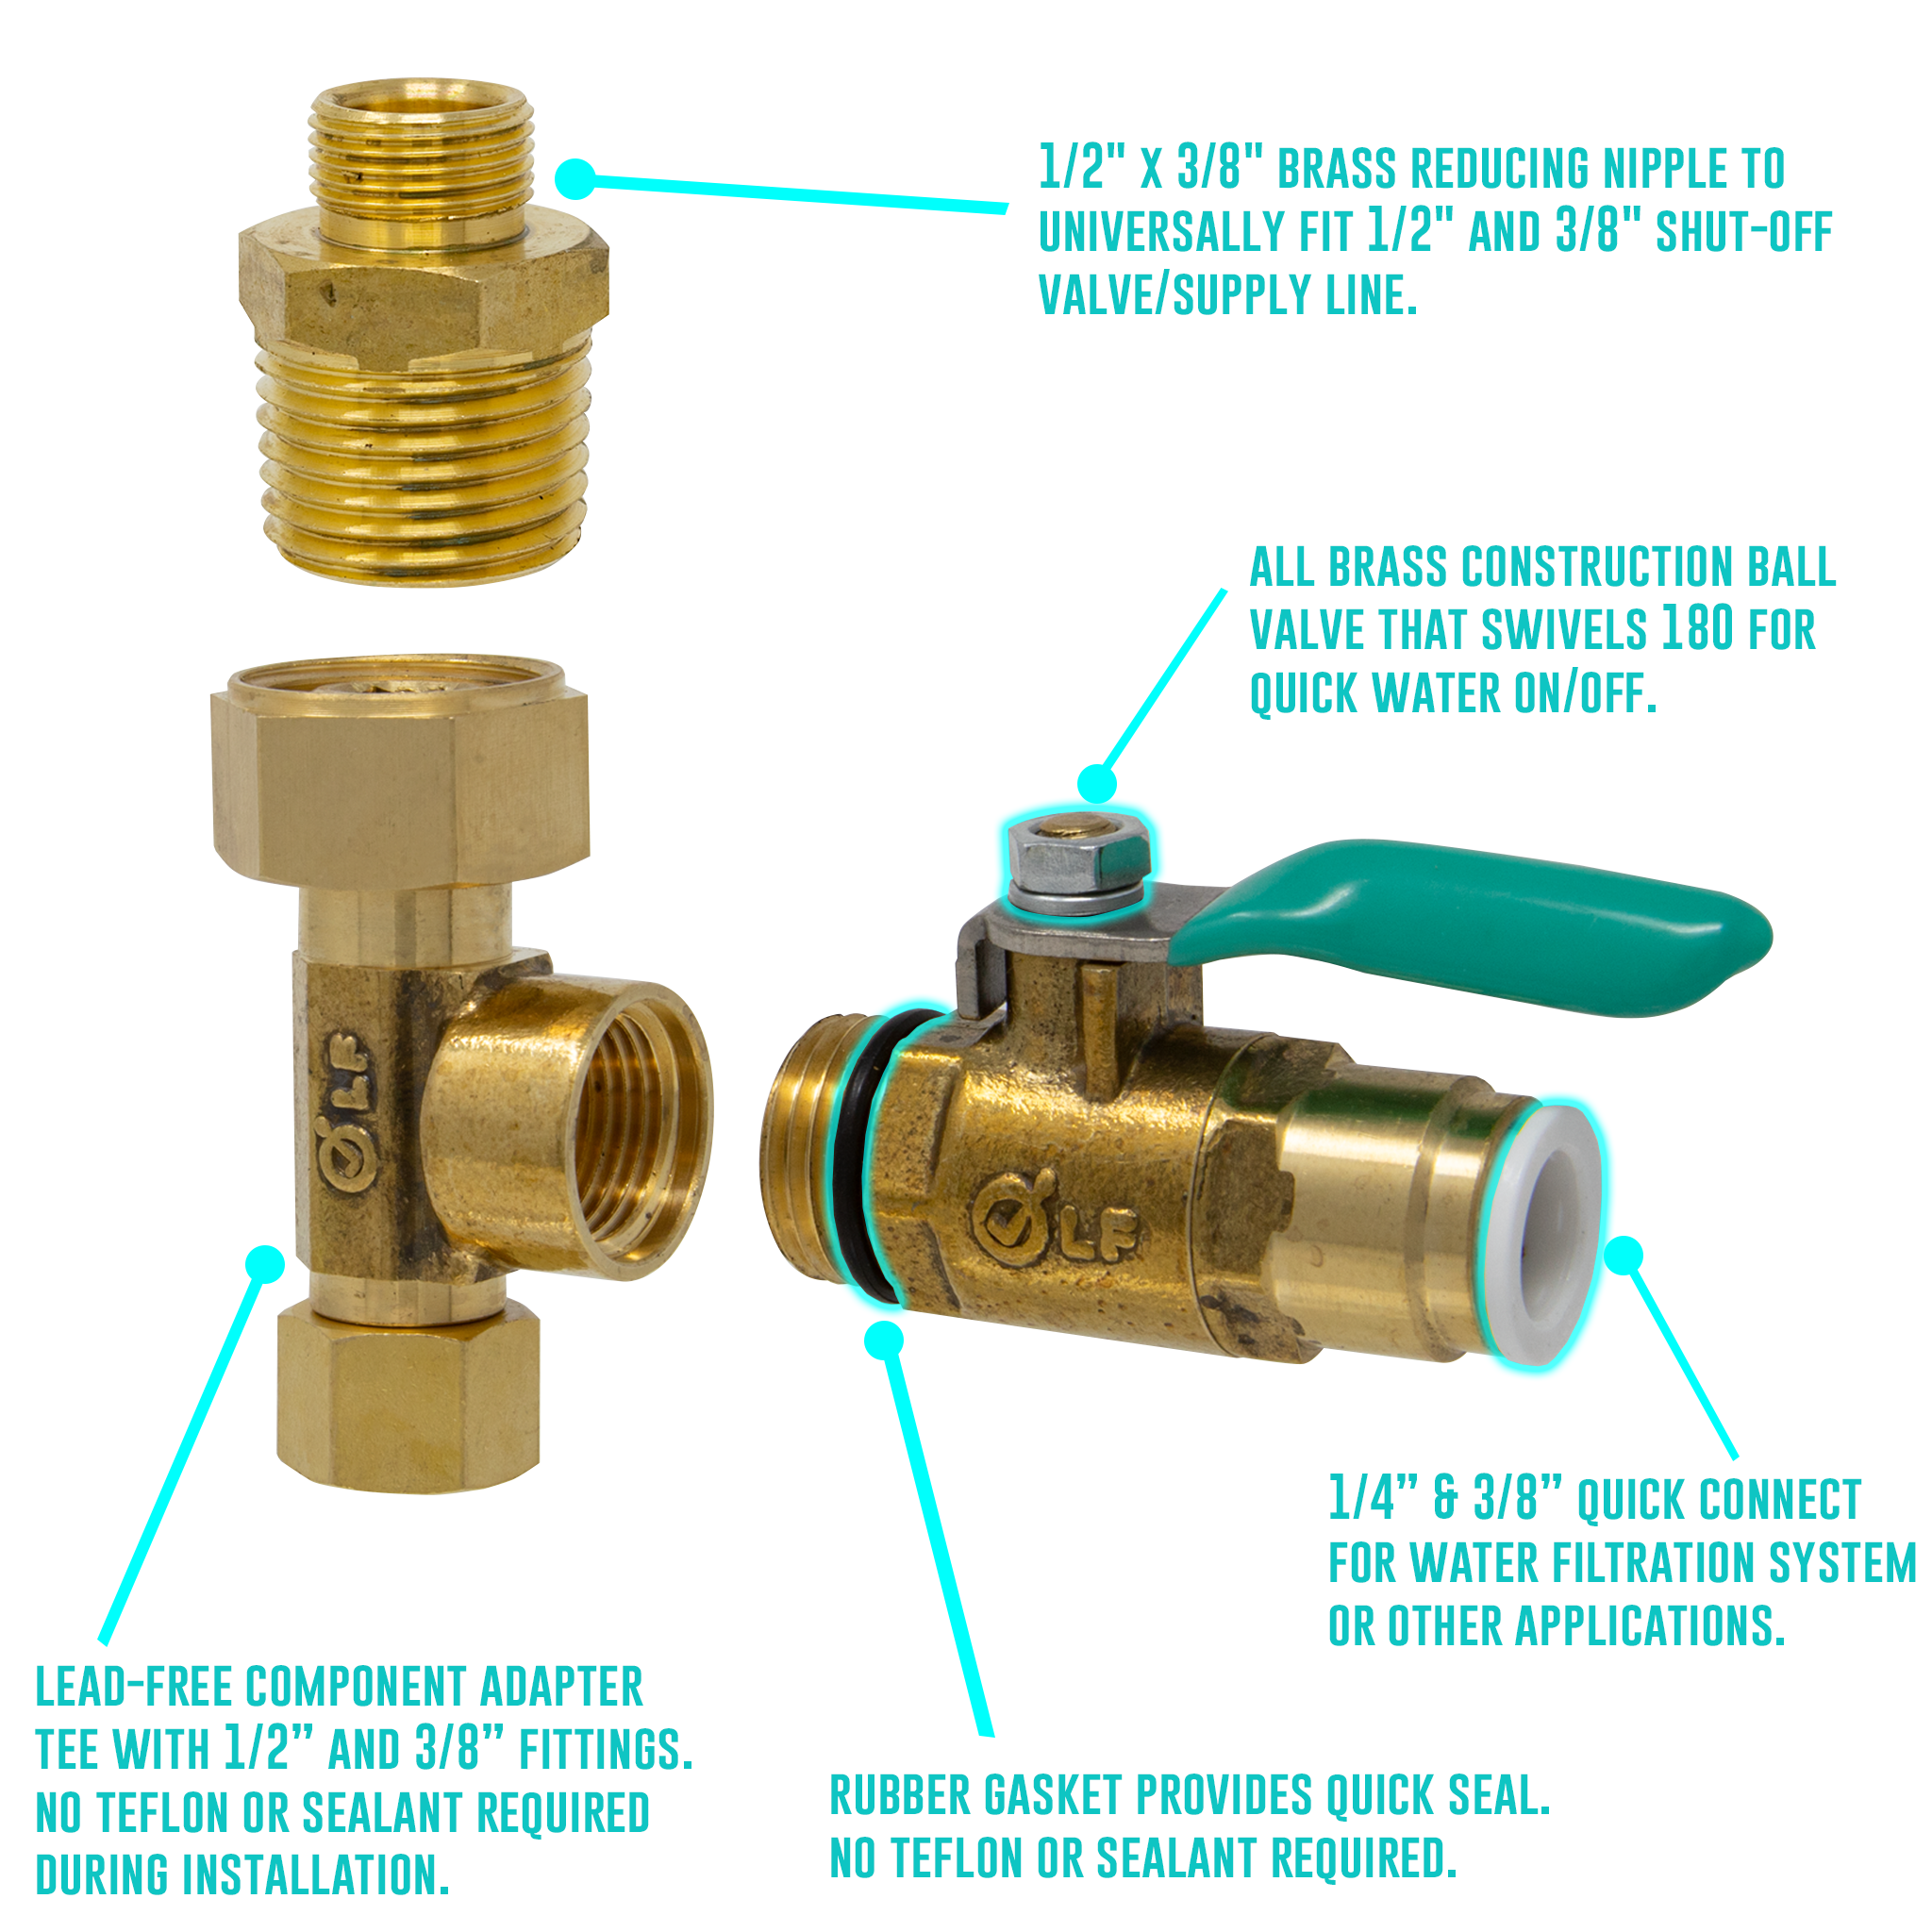 Shut Off Valve with EZ On Connections